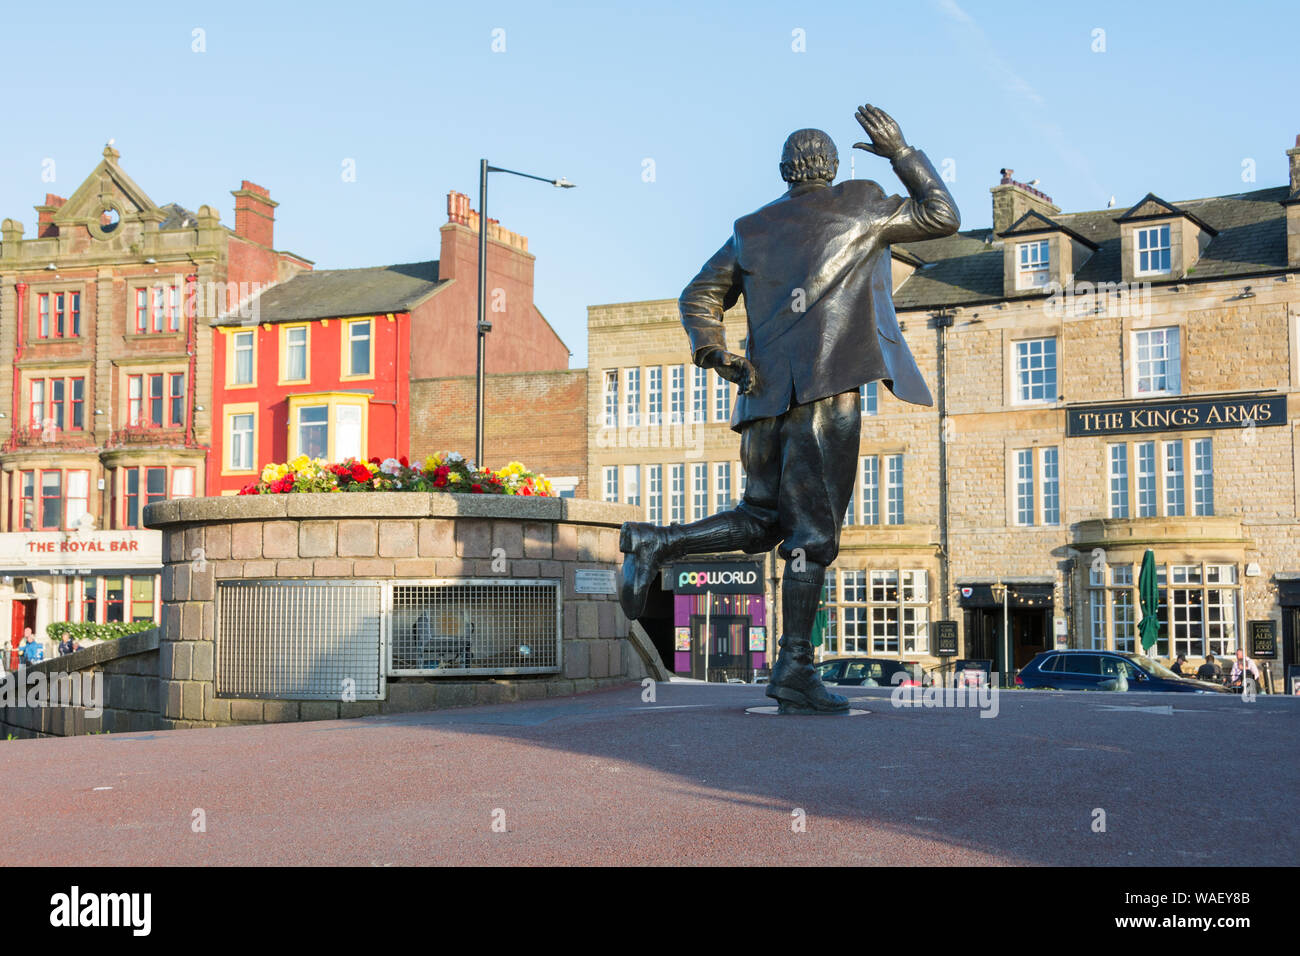 Statue of English comedian Eric Morecambe in a characteristic pose on Marine Road Central, Morecambe Bay, Lancs, England, U.K. Stock Photo